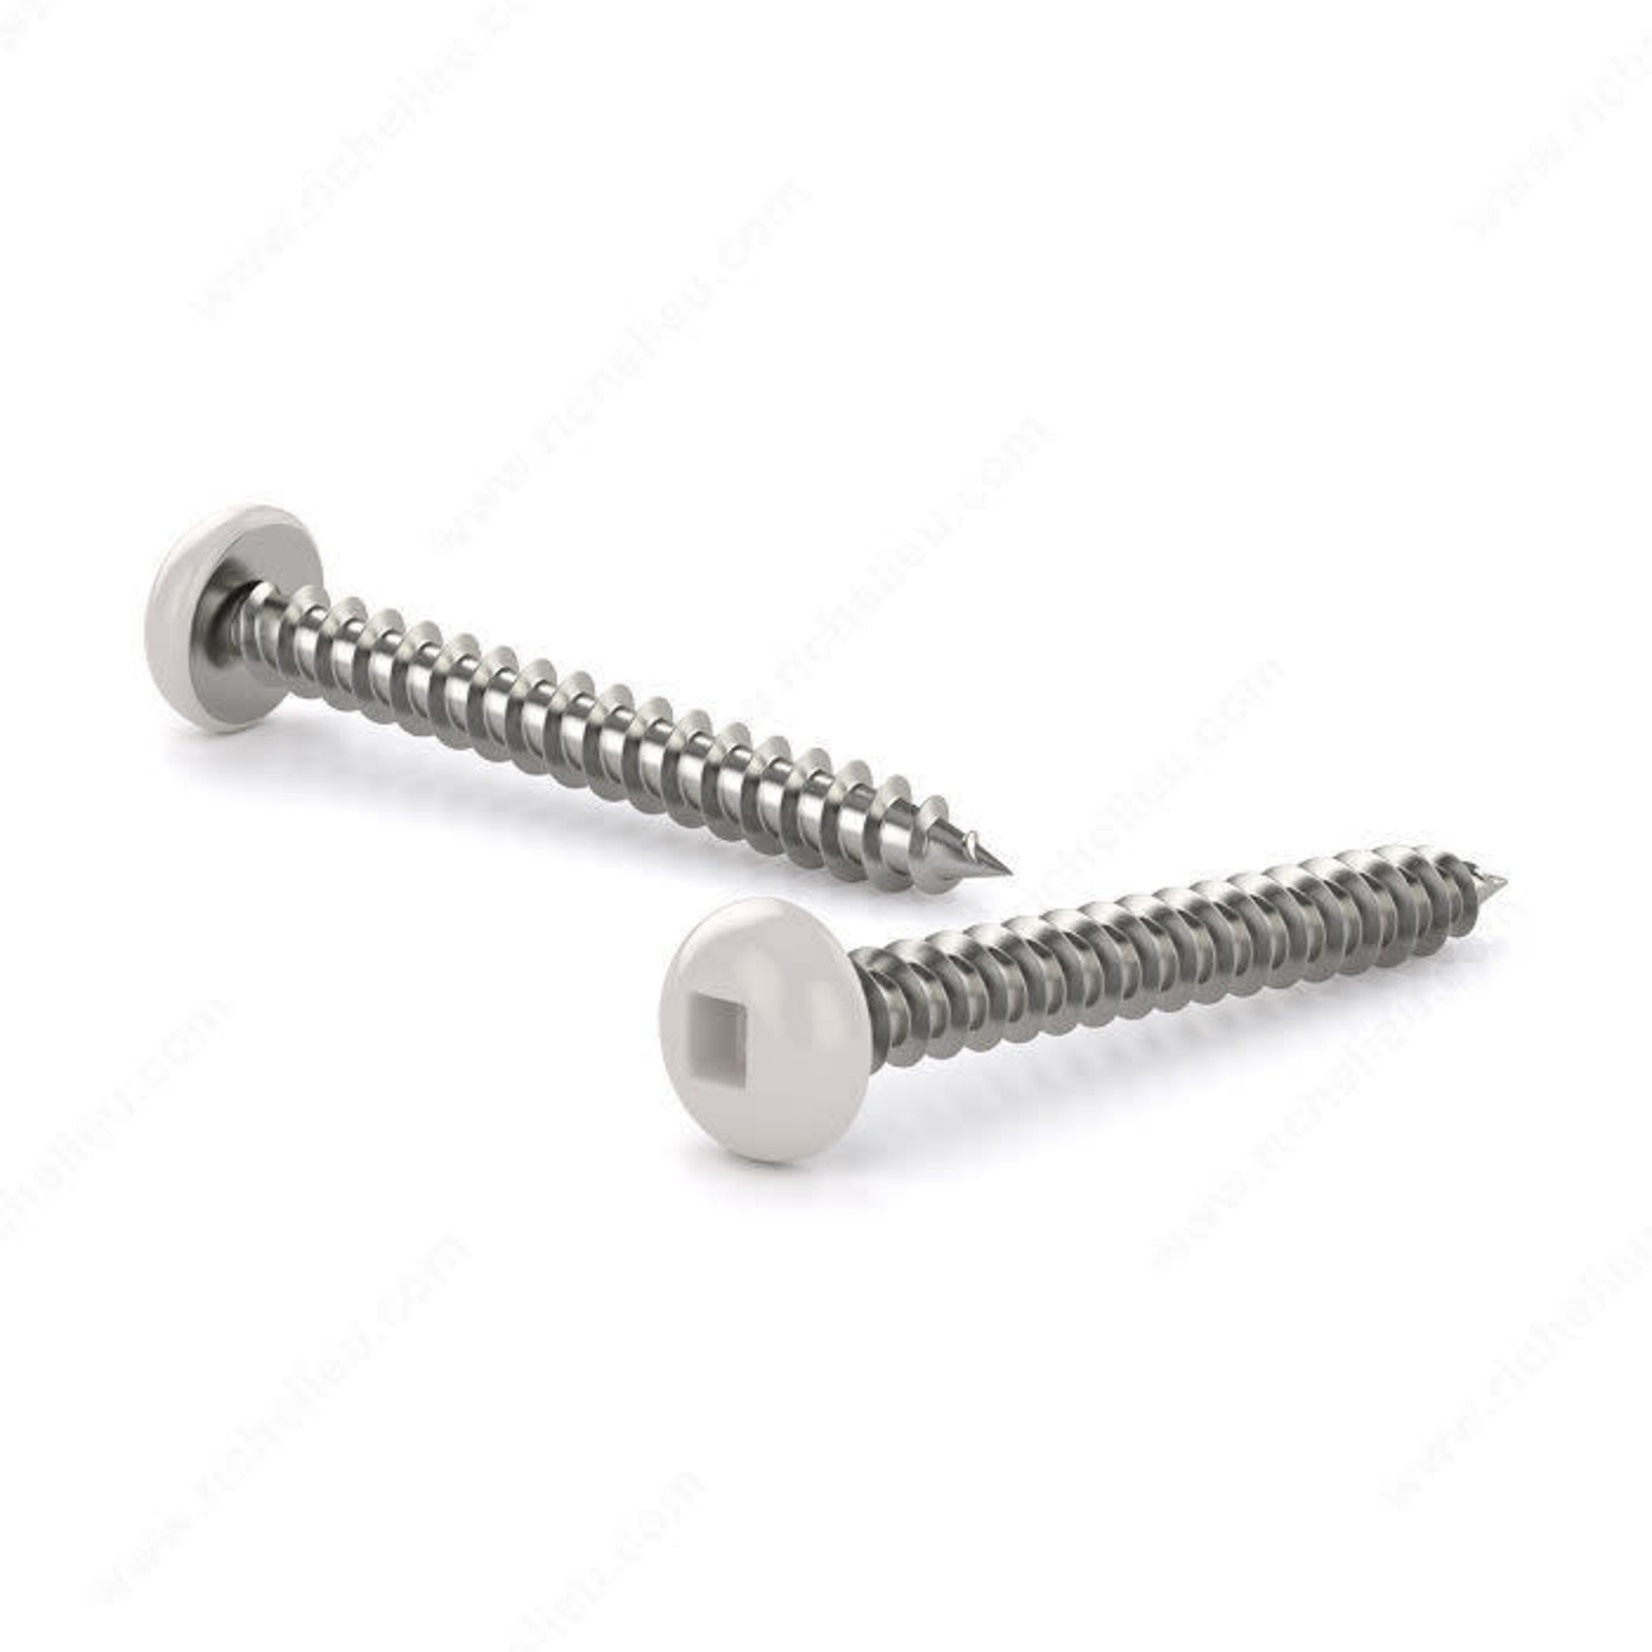 RELIABLE COLORED SCREW WHITE, PAN HEAD, SELF-TAPPING #8 5/8IN, 500PK